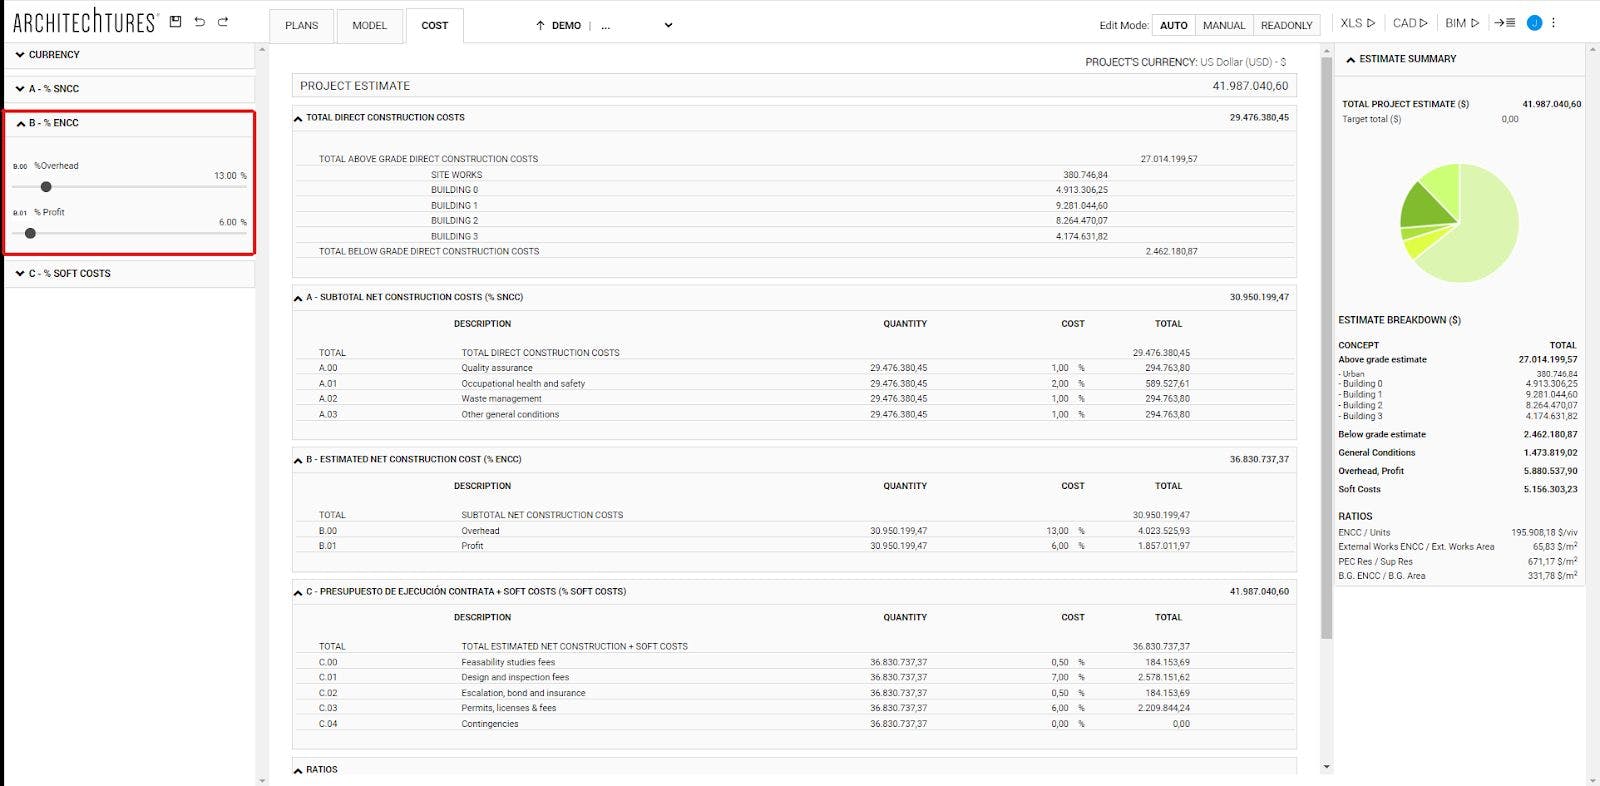 ENCC tab in cost view of ARCHITEChTURES